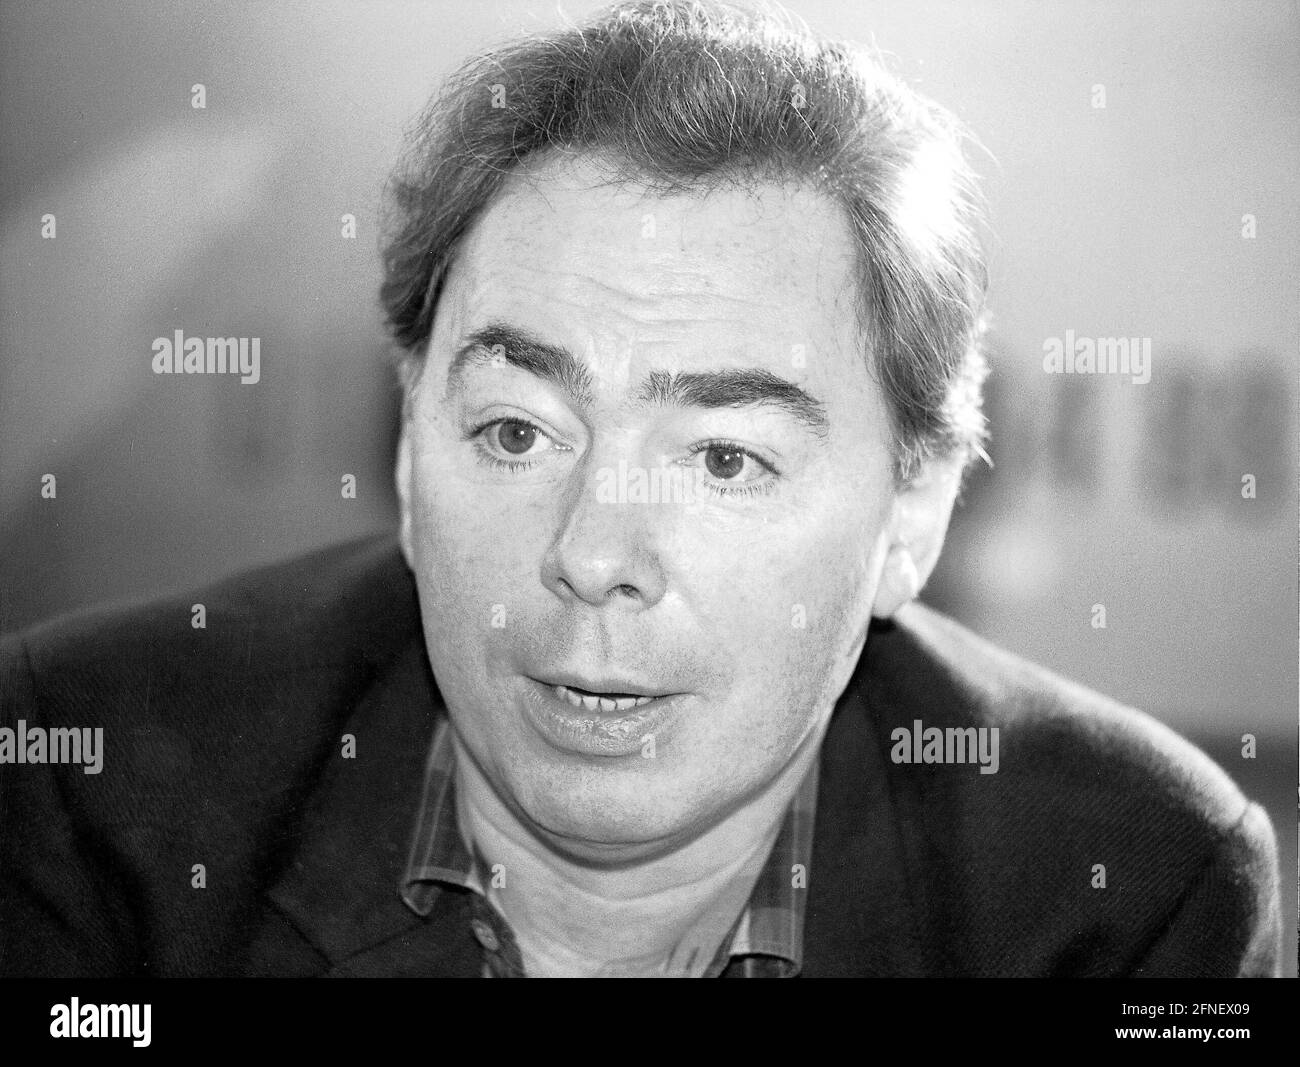 'The English star composer Andrew Lloyd Webber is the father of such important works as ''Evita'' or ''Phantom of the Opera''. With his latest musical ''Sunset Boulevard'', the 47-year-old has landed another major success. [automated translation]' Stock Photo